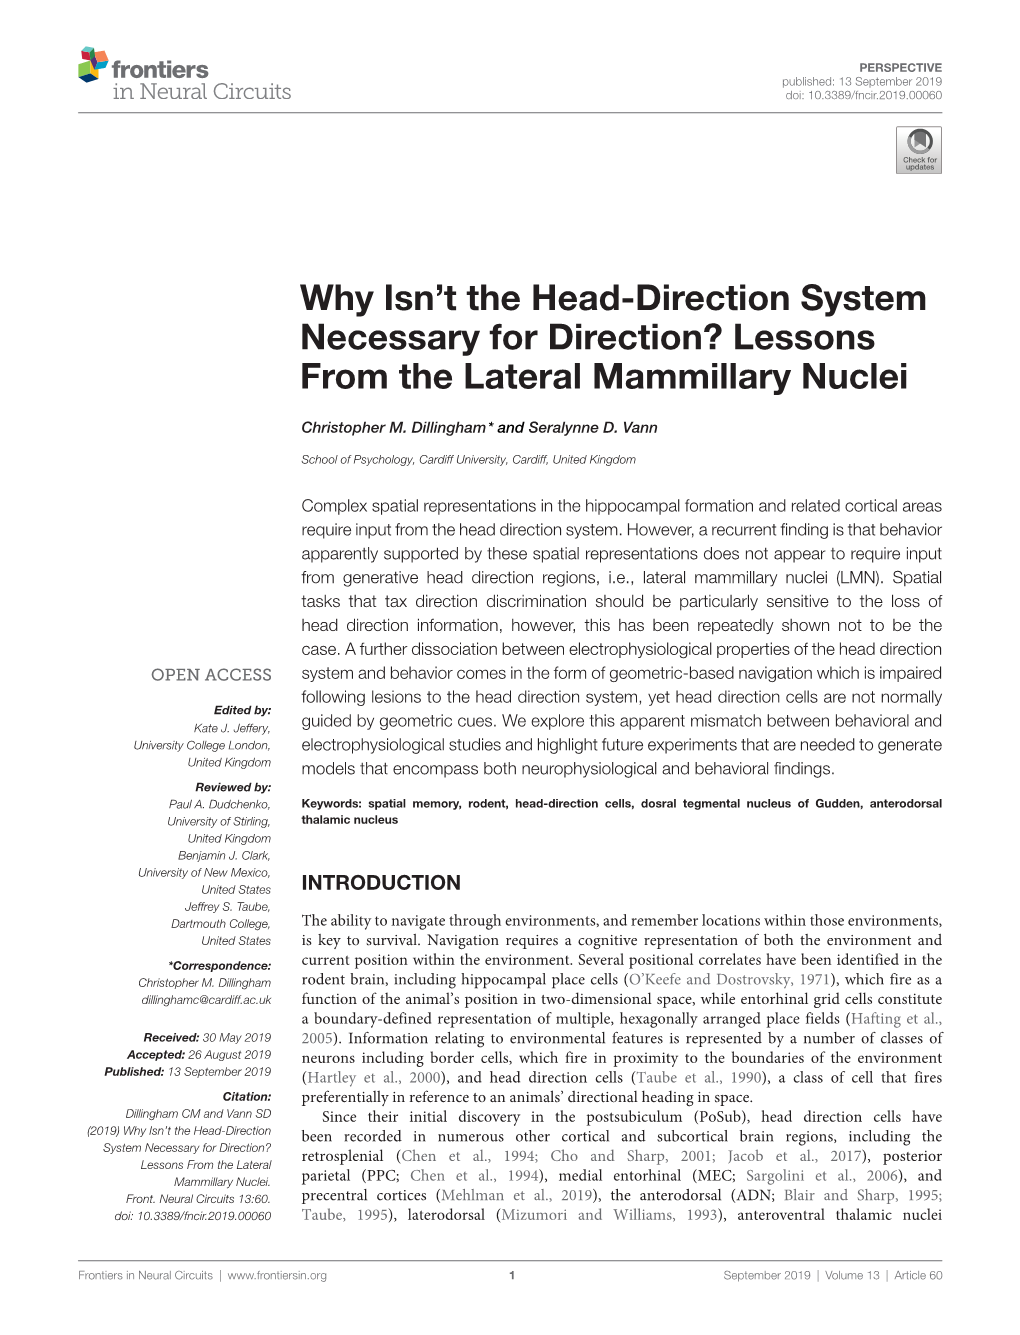 Why Isn't the Head-Direction System